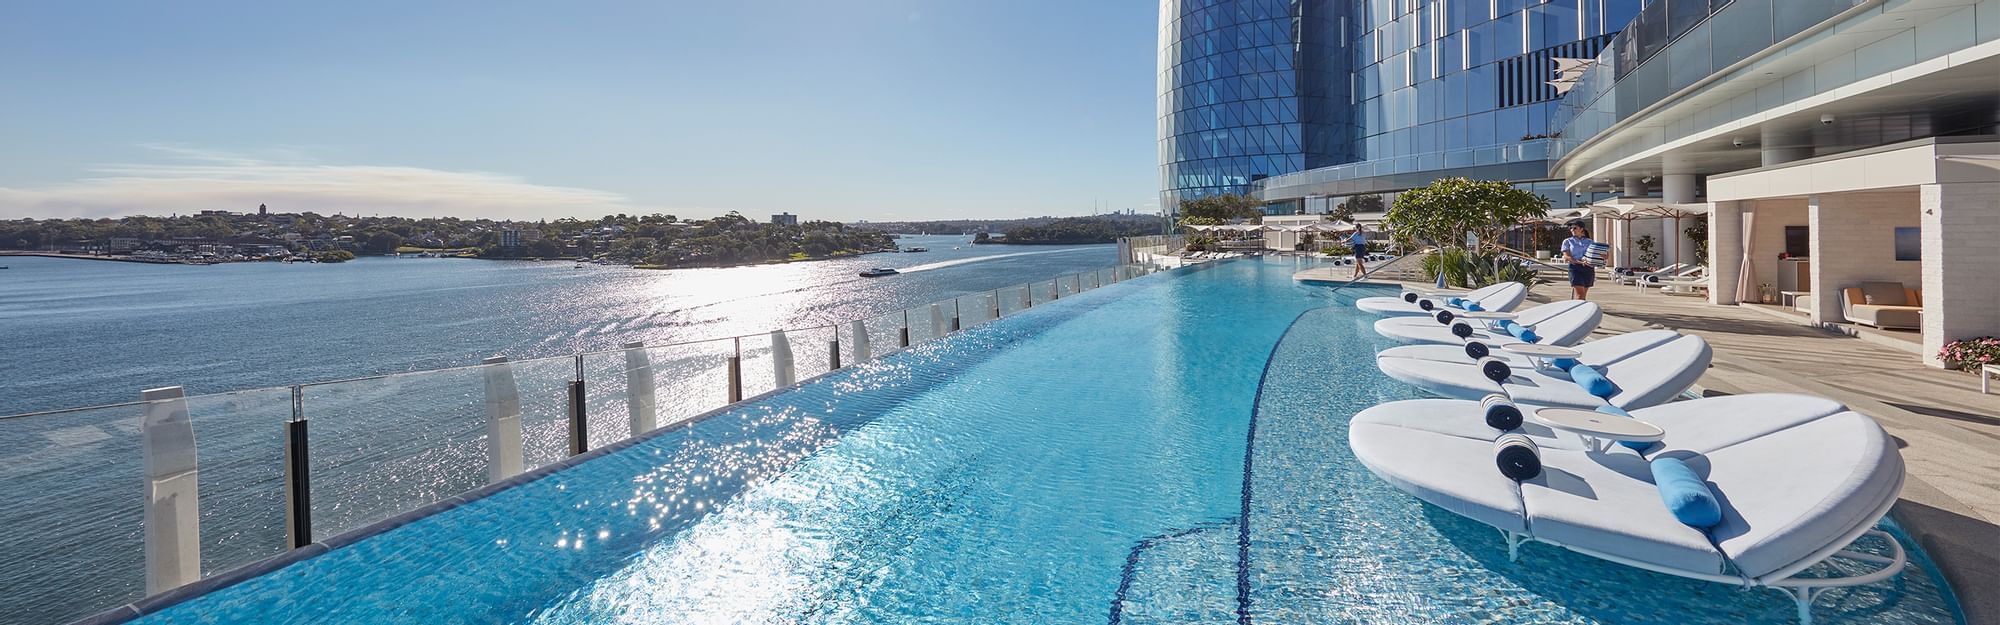 Swimming pool with sun loungers at Crown Towers Sydney